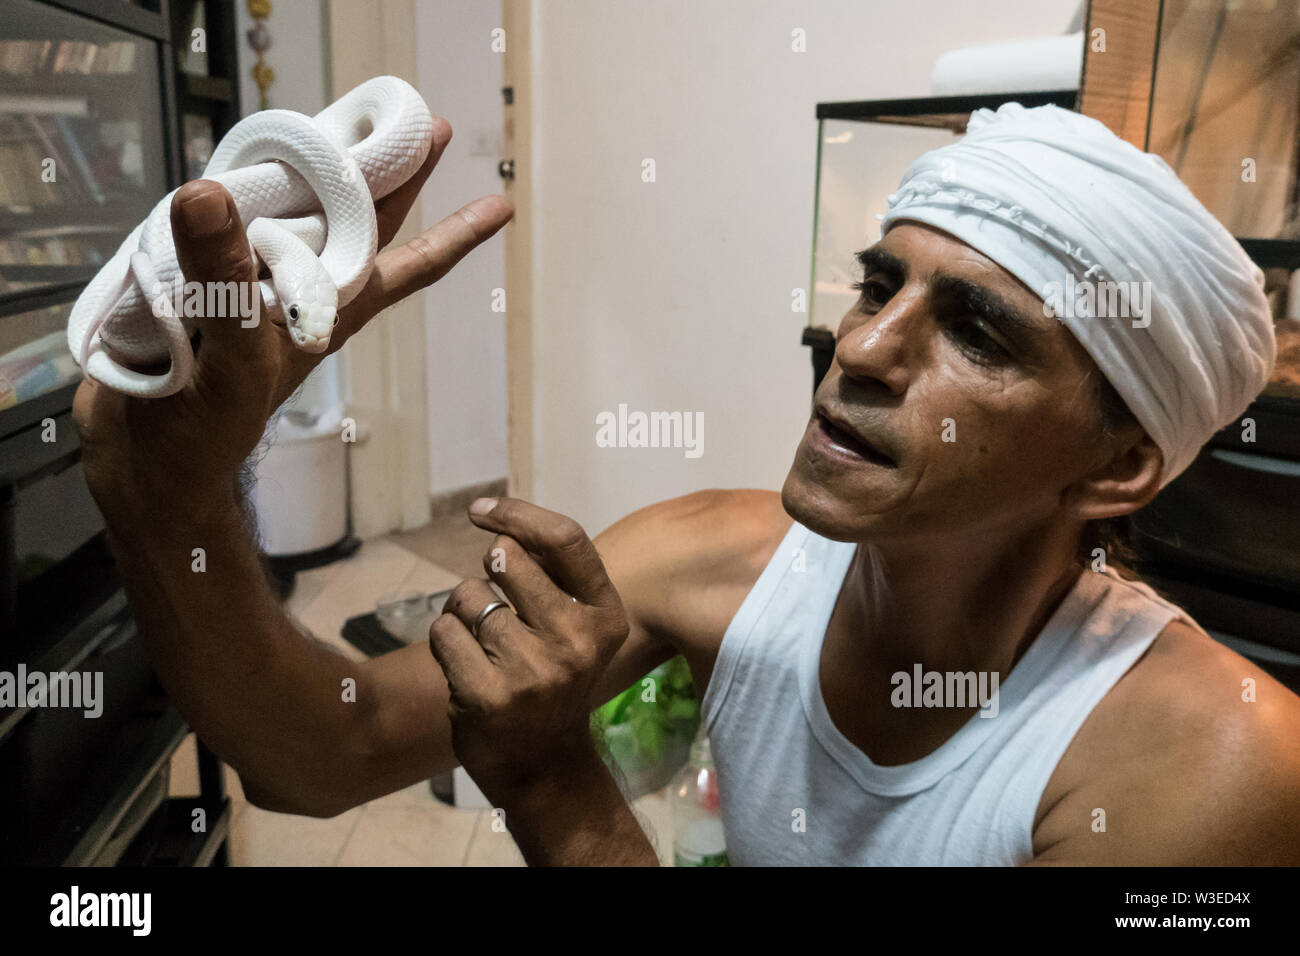 Karmei Yosef, Israel. 15th July, 2019. Israeli snake handler, breeder and catcher RAFAEL YIFRACH, 52, handles an albino Nelson's milksnake in his home in Karmei Yosef. Yifrach has been intrigued by snakes since he was seven years old, he’s been bitten by venomous snakes 18 times and currently grows and breeds some 300 non venomous snakes. World Snake Day is celebrated 16th July contributing to the cause of conservation of a sometimes dangerous but mostly misrepresented reptile. Credit: Nir Alon/Alamy Live News. Stock Photo